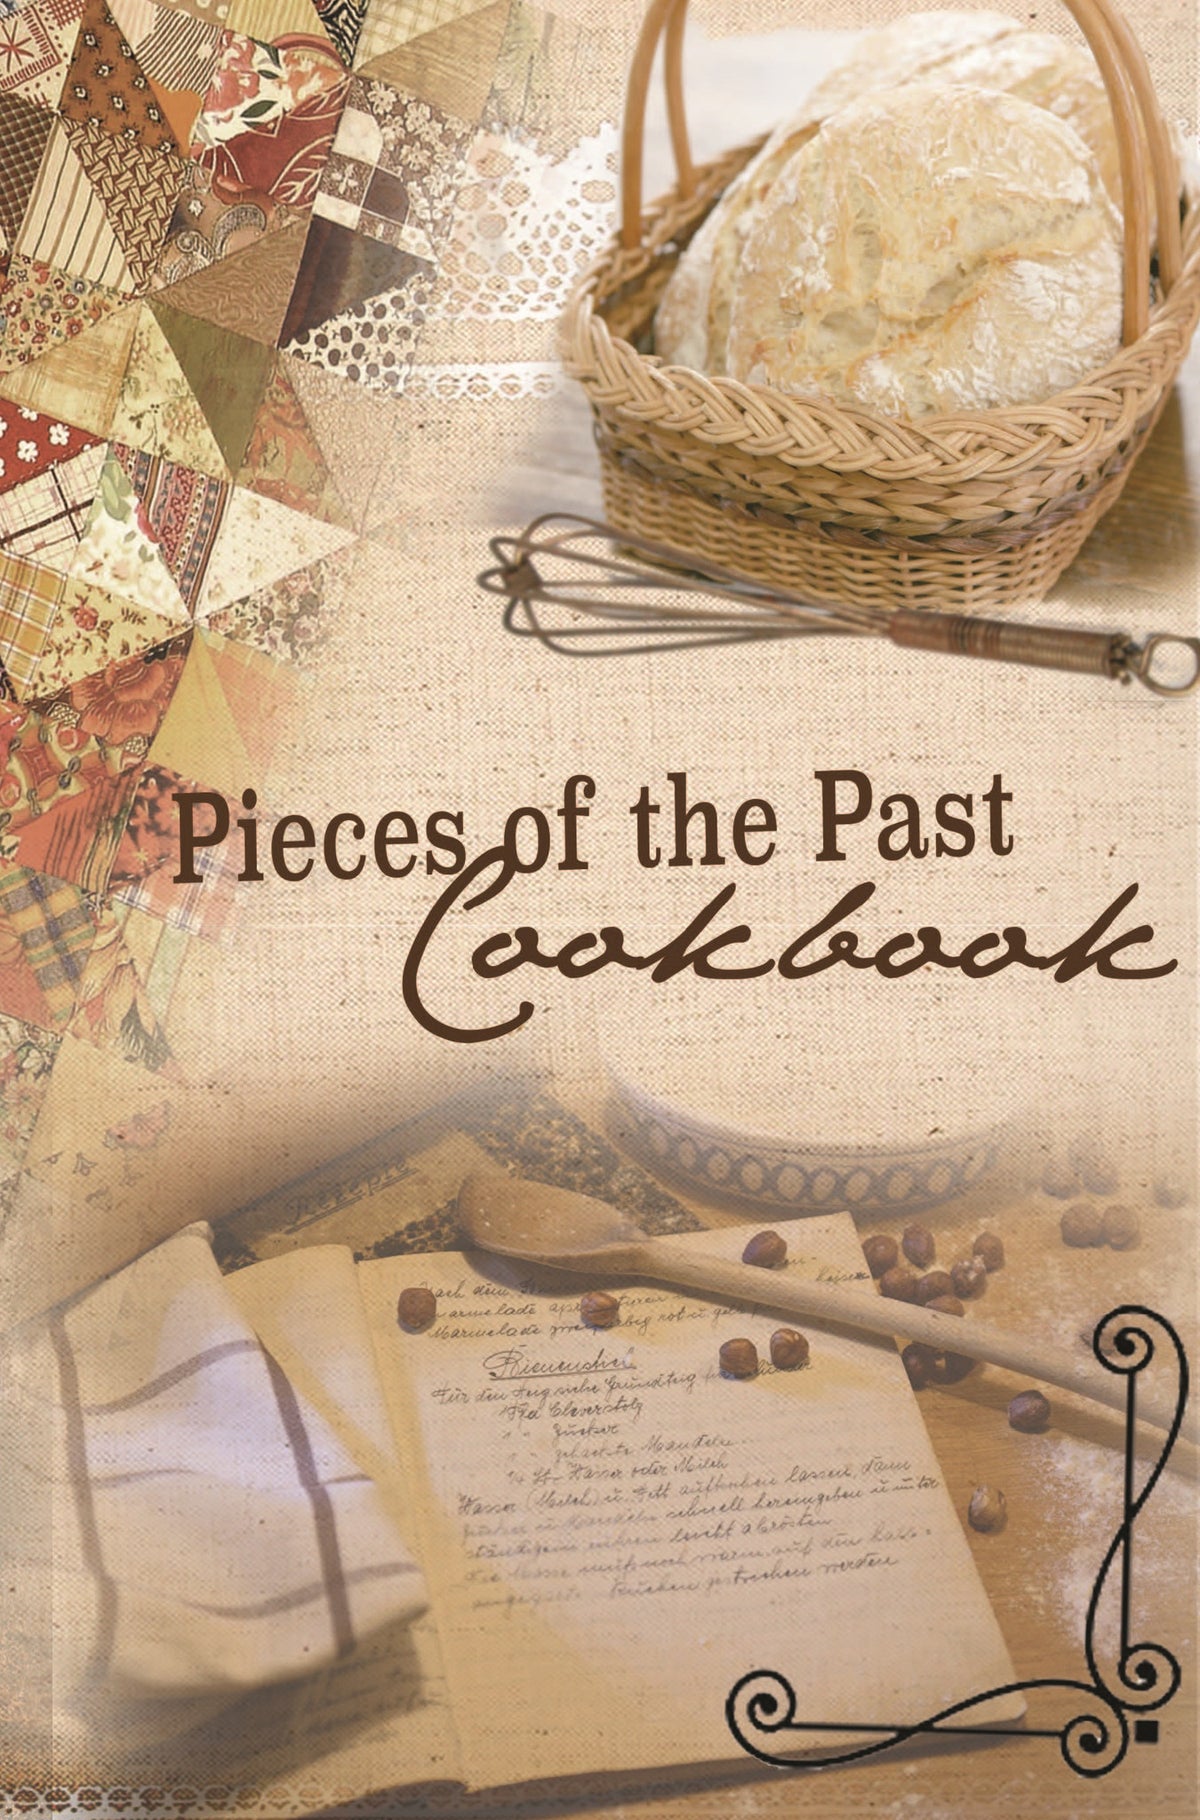 Pieces of the Past Cookbook